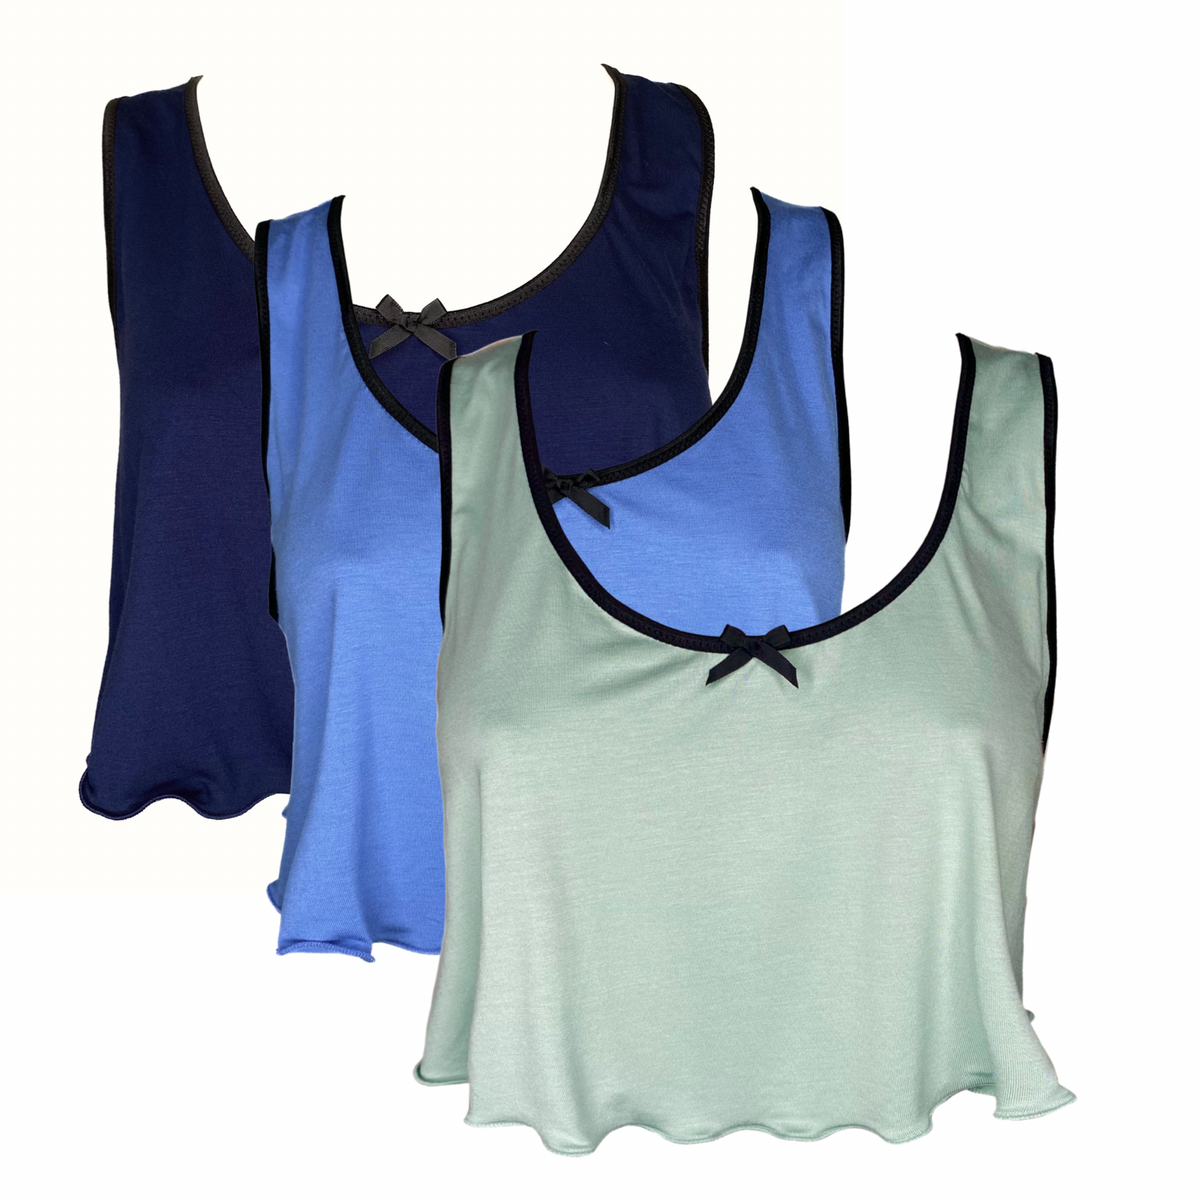 Cropped Camisole Trio - Mint, Cornflower Blue, & Navy Bamboo